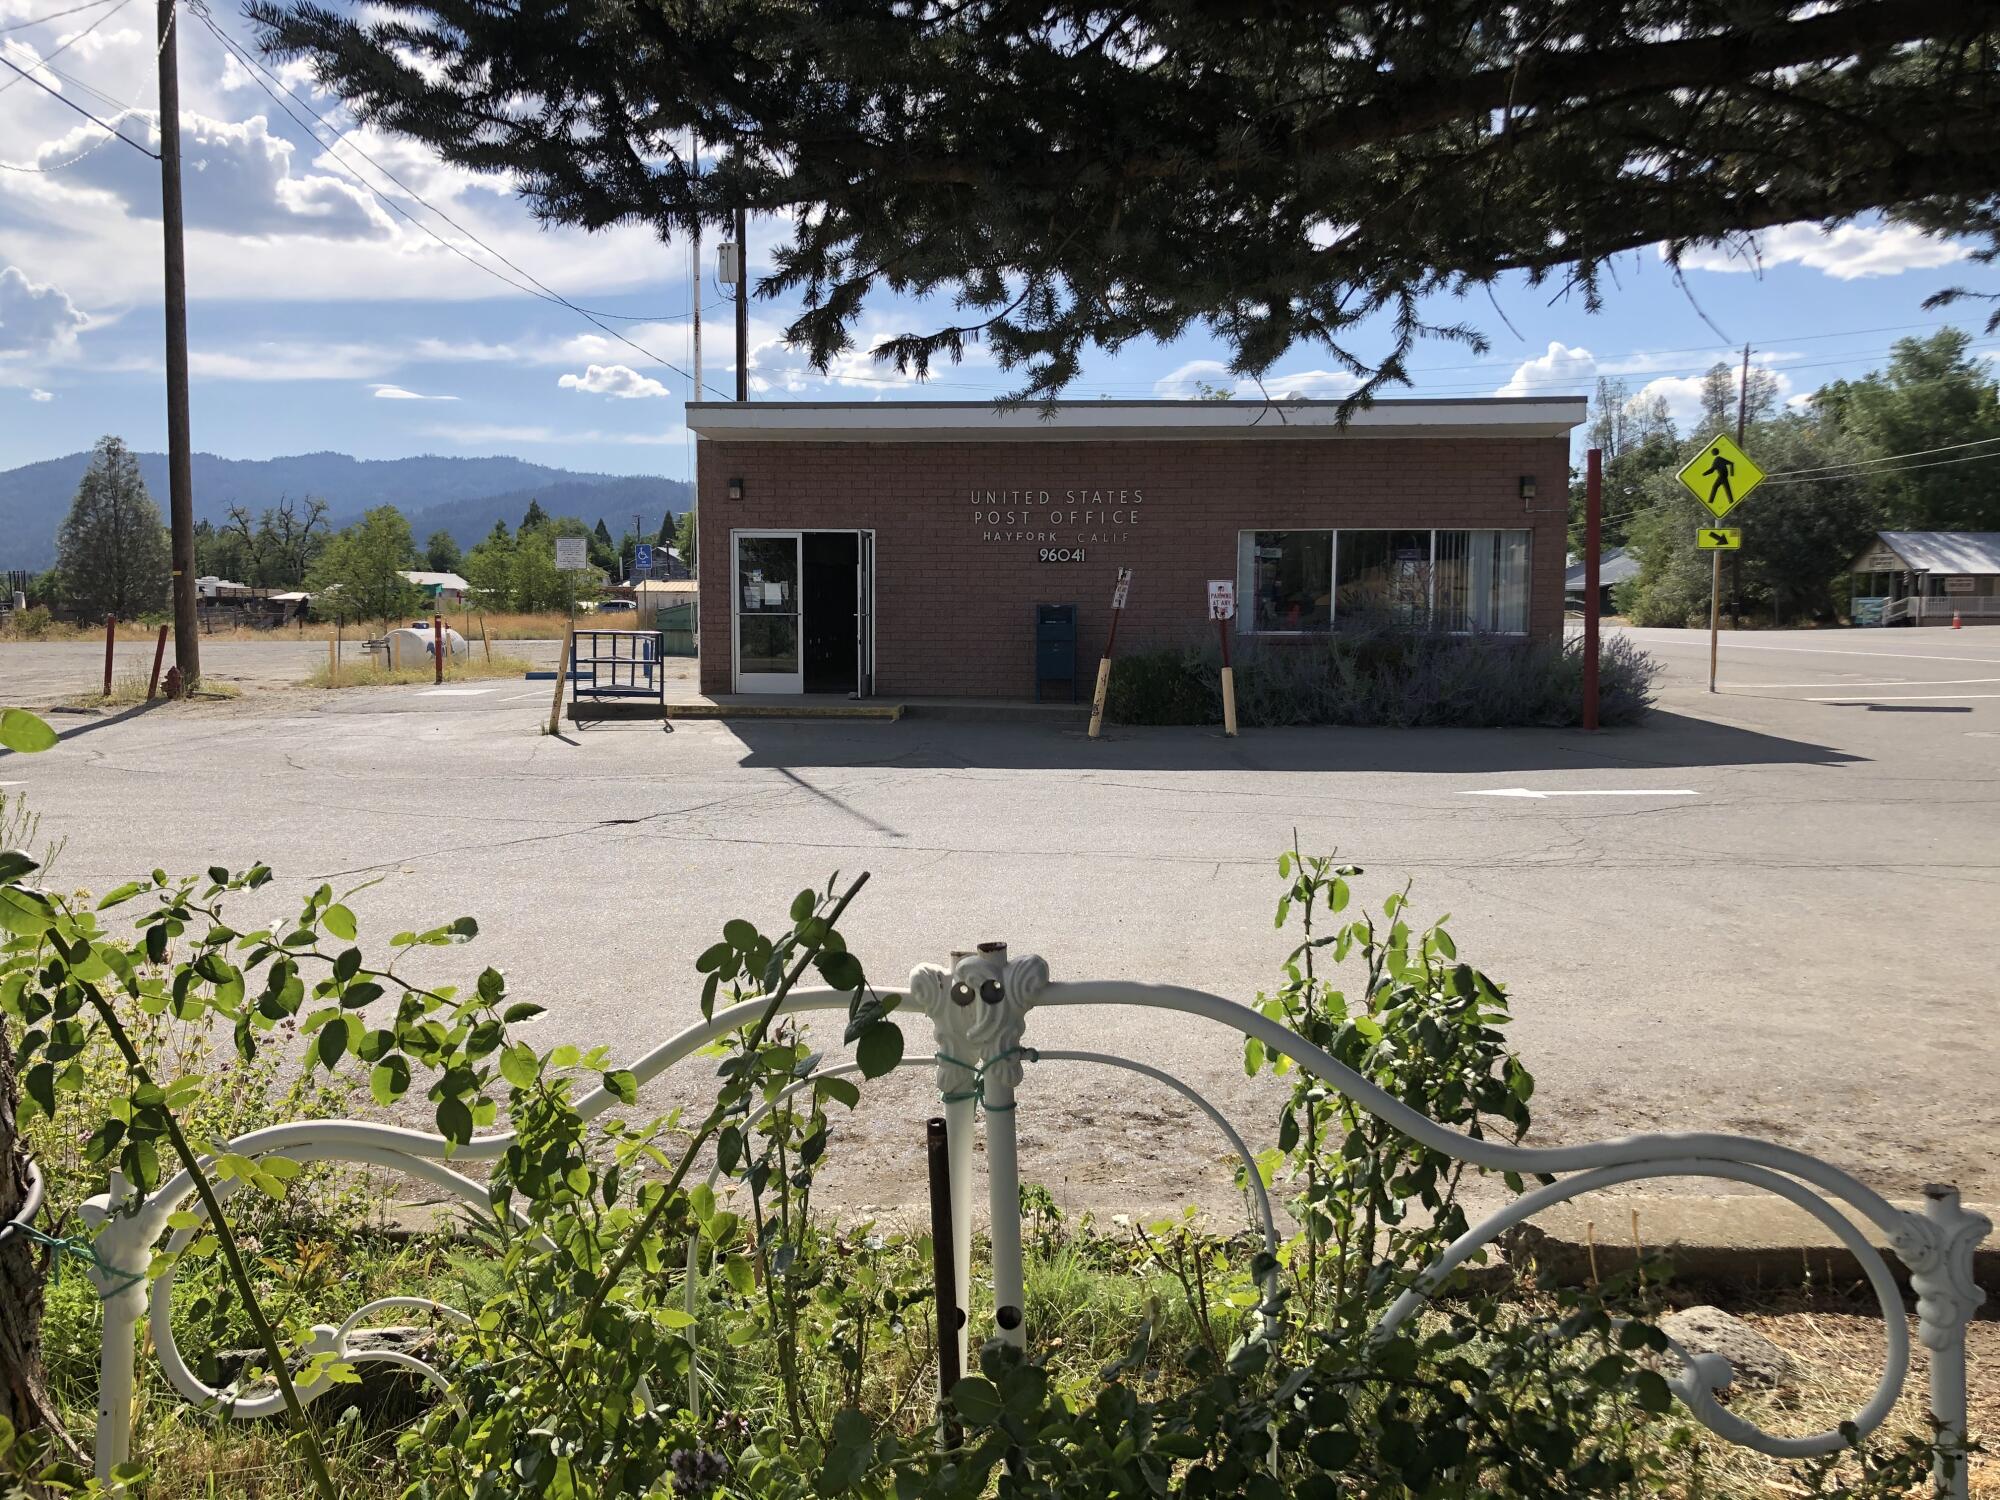 The small post office in Hayfork, Calif.